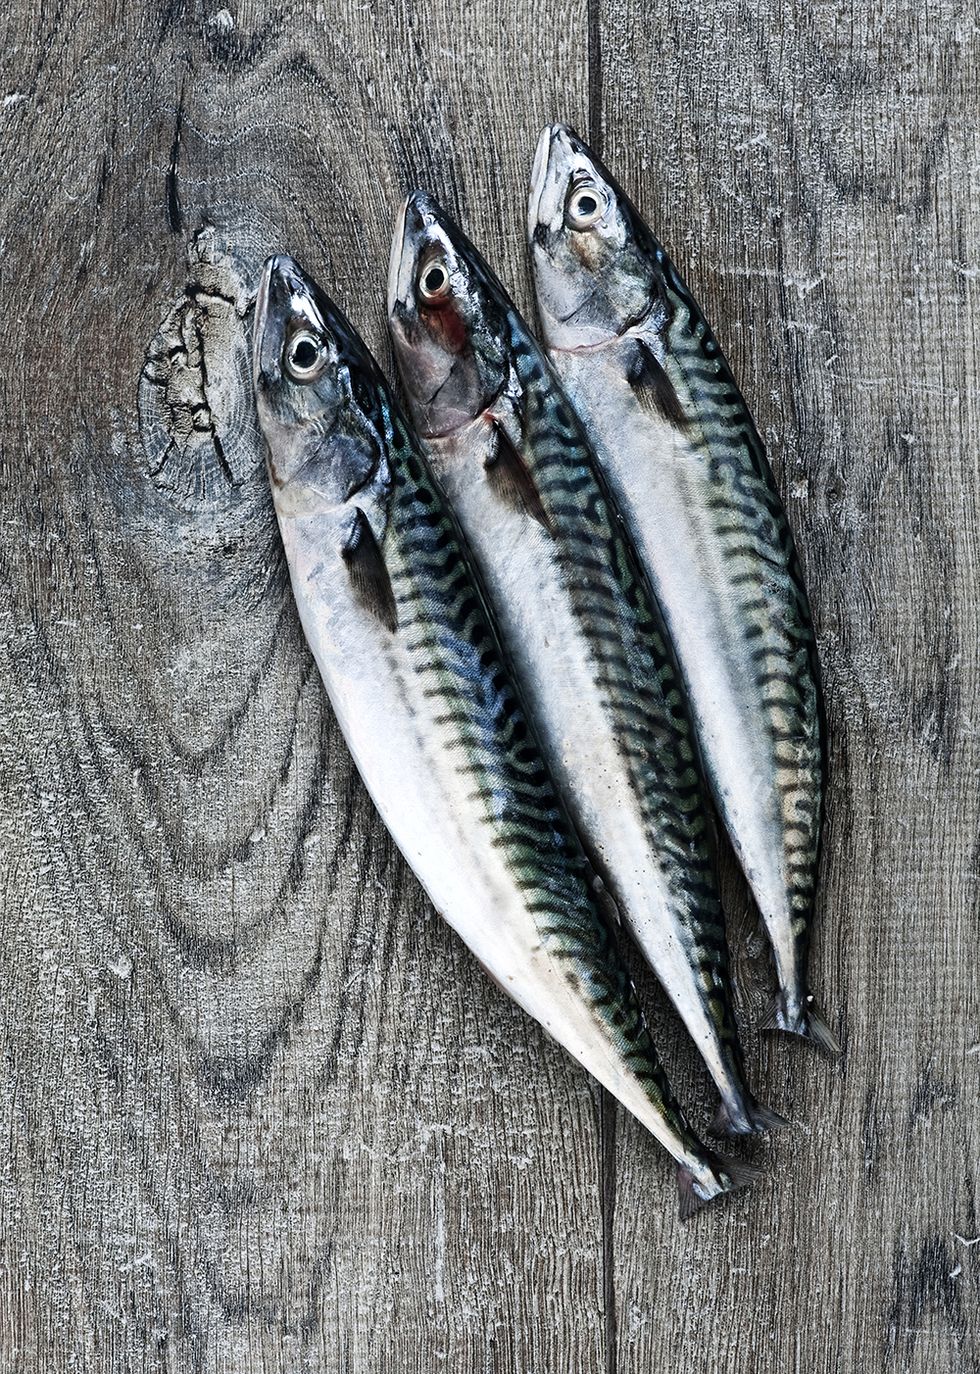 White, Fish, Fish, Grey, Silver, Mackerel, Seafood, Ray-finned fish, Anchovy (food), Forage fish, 